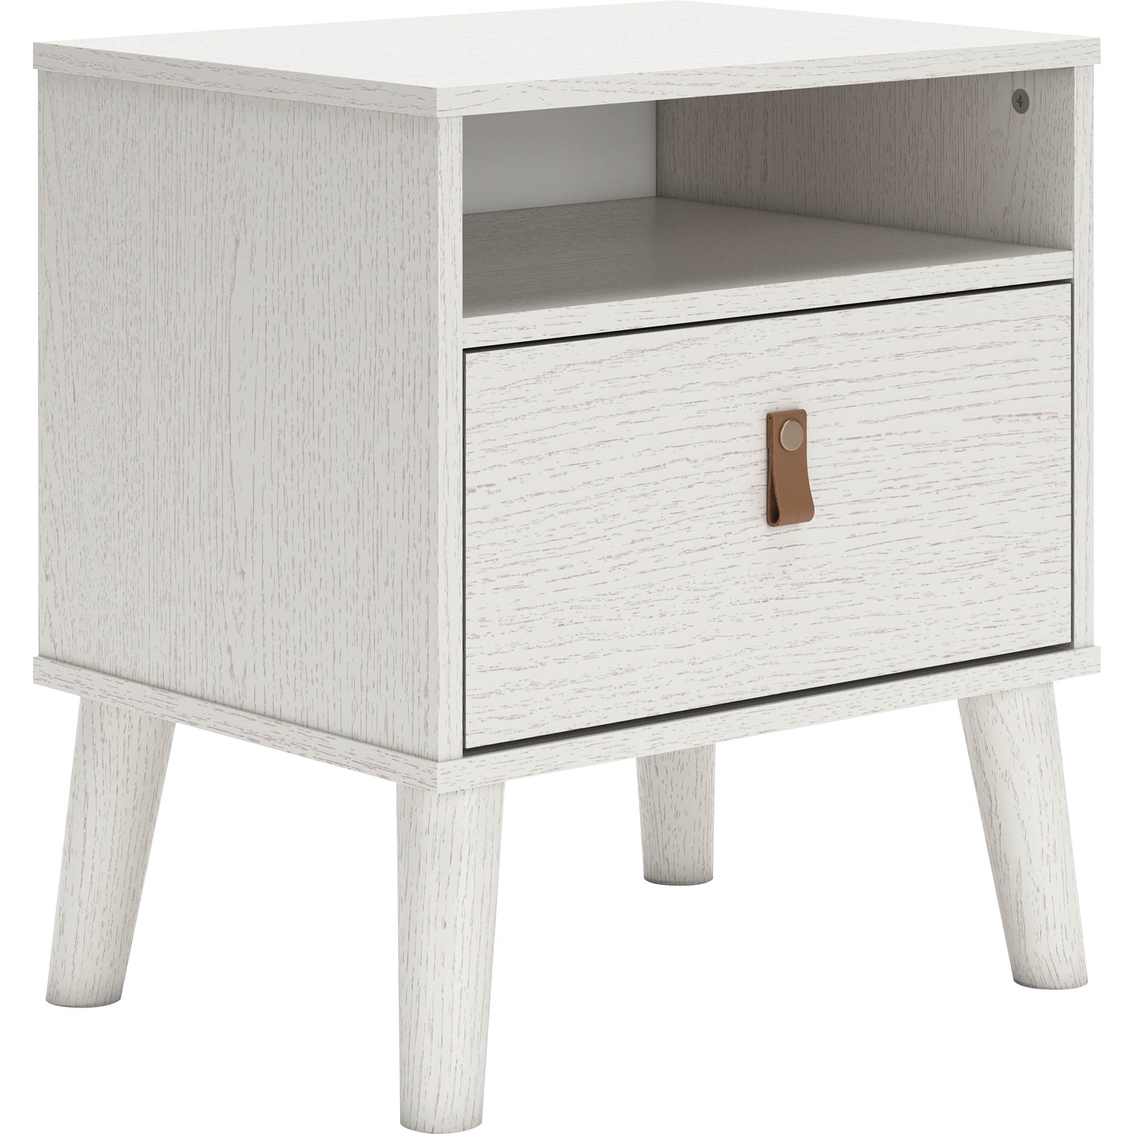 Signature Design by Ashley Aprilyn RTA Nightstand - Image 3 of 6